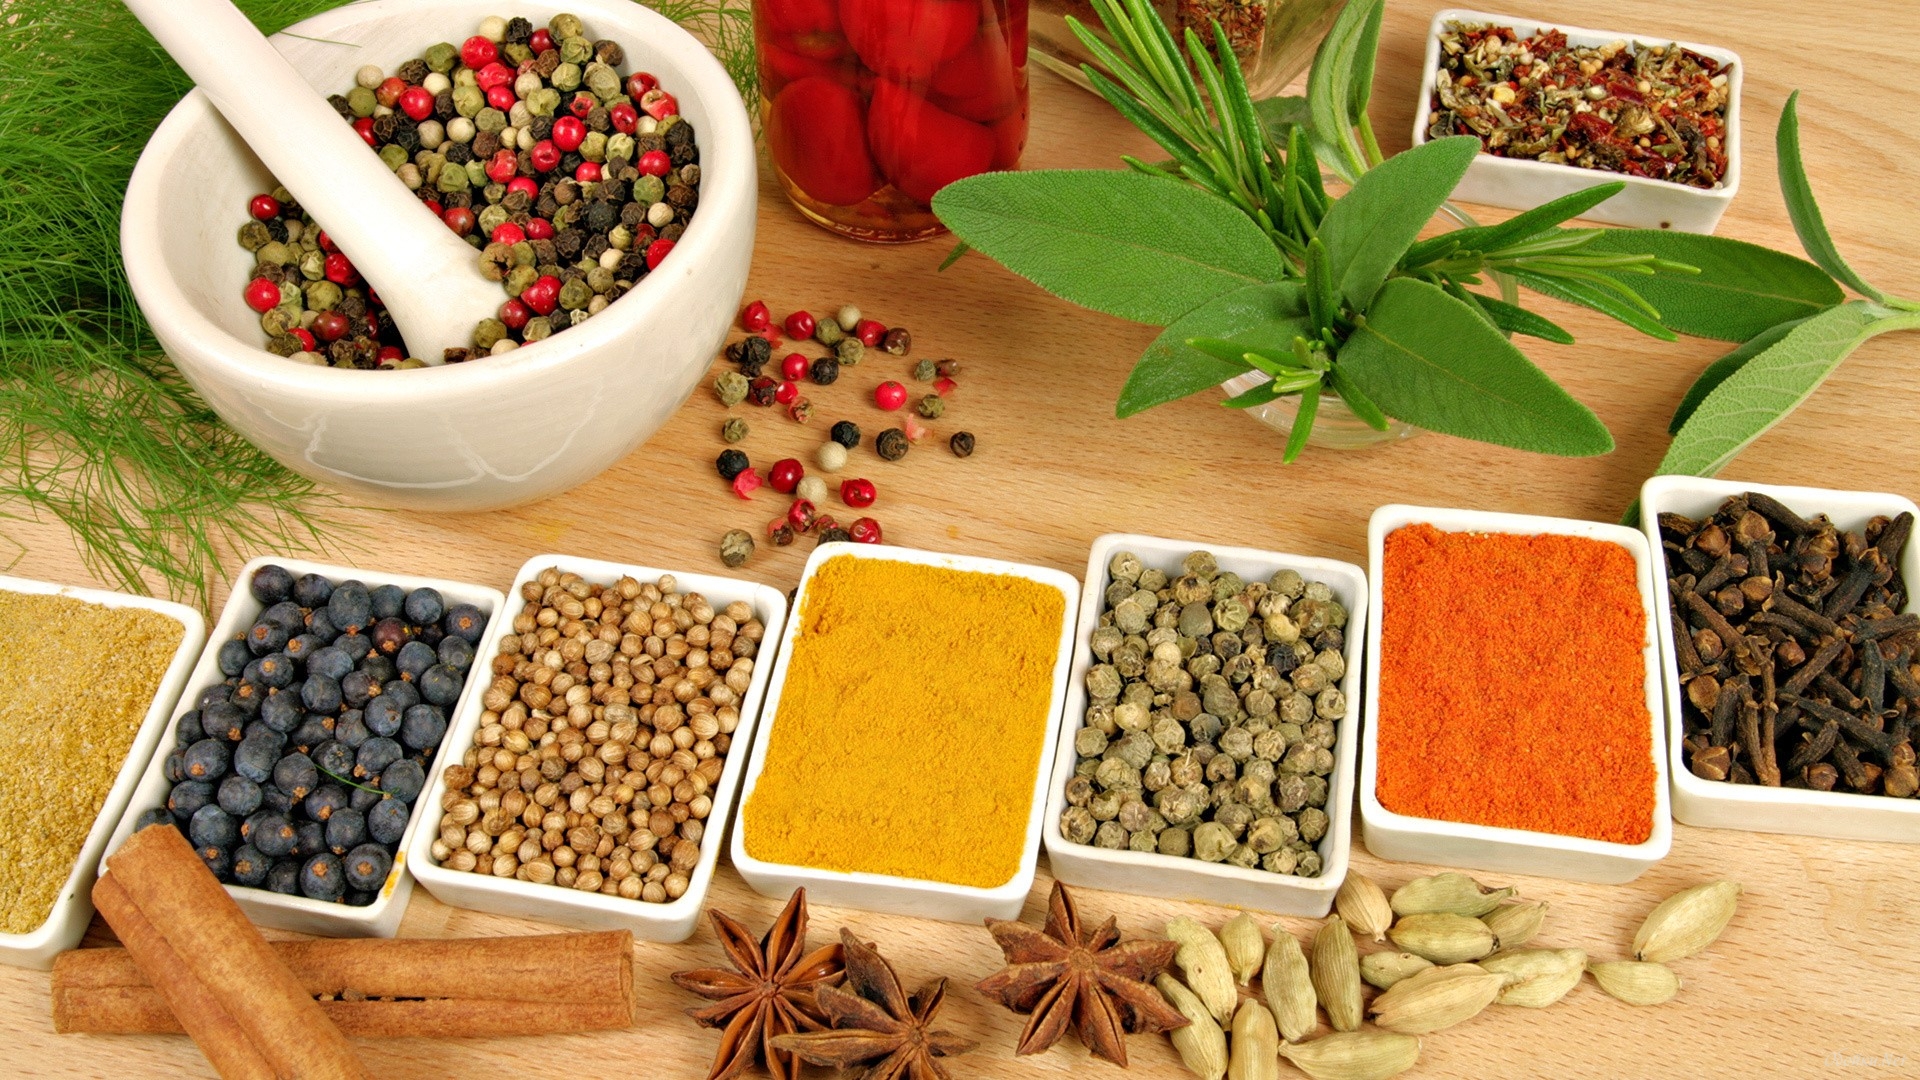 50+ Spices HD Wallpapers and Backgrounds